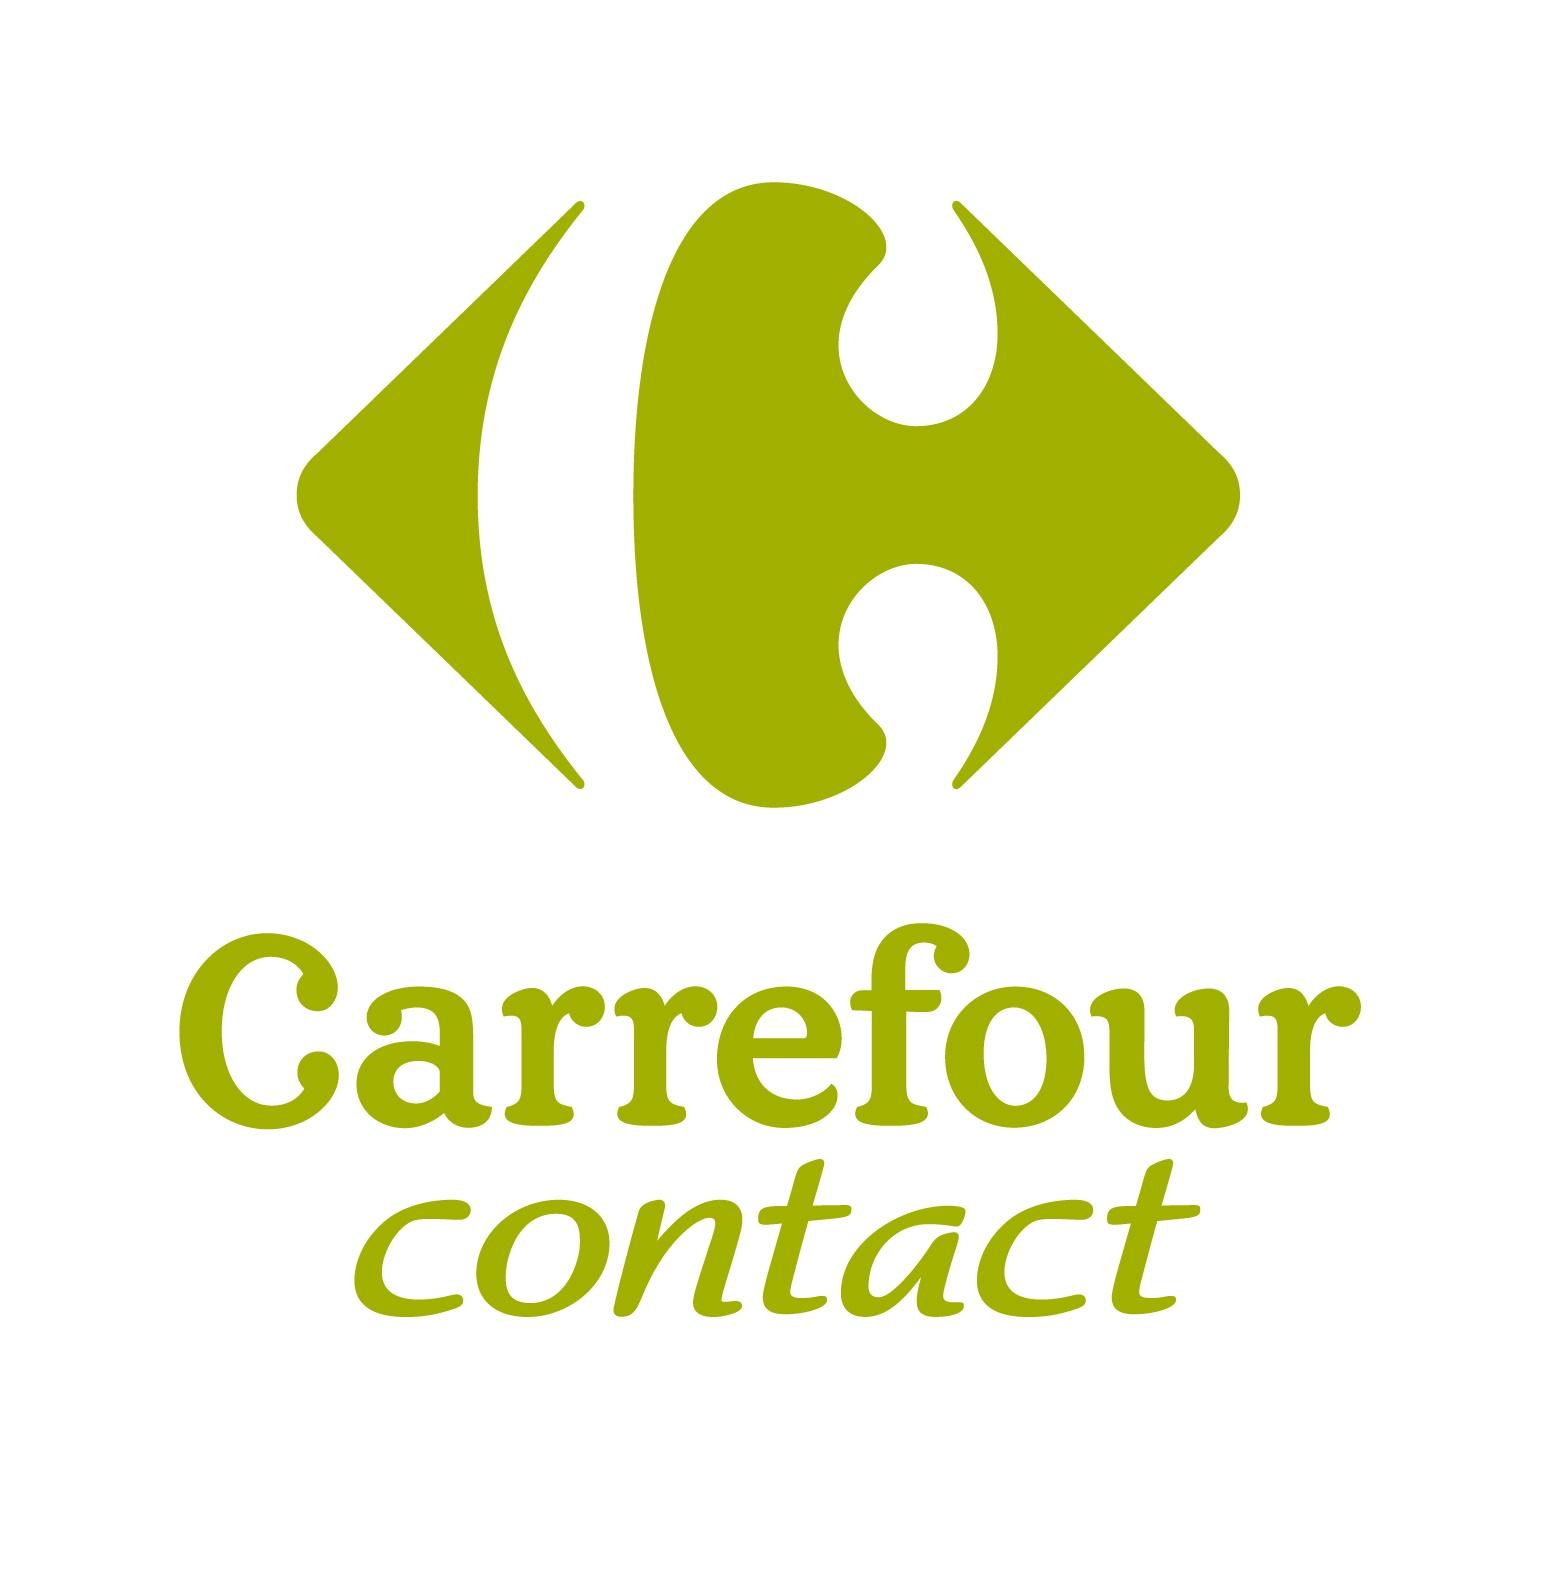 Carrefour Contact Gonesse